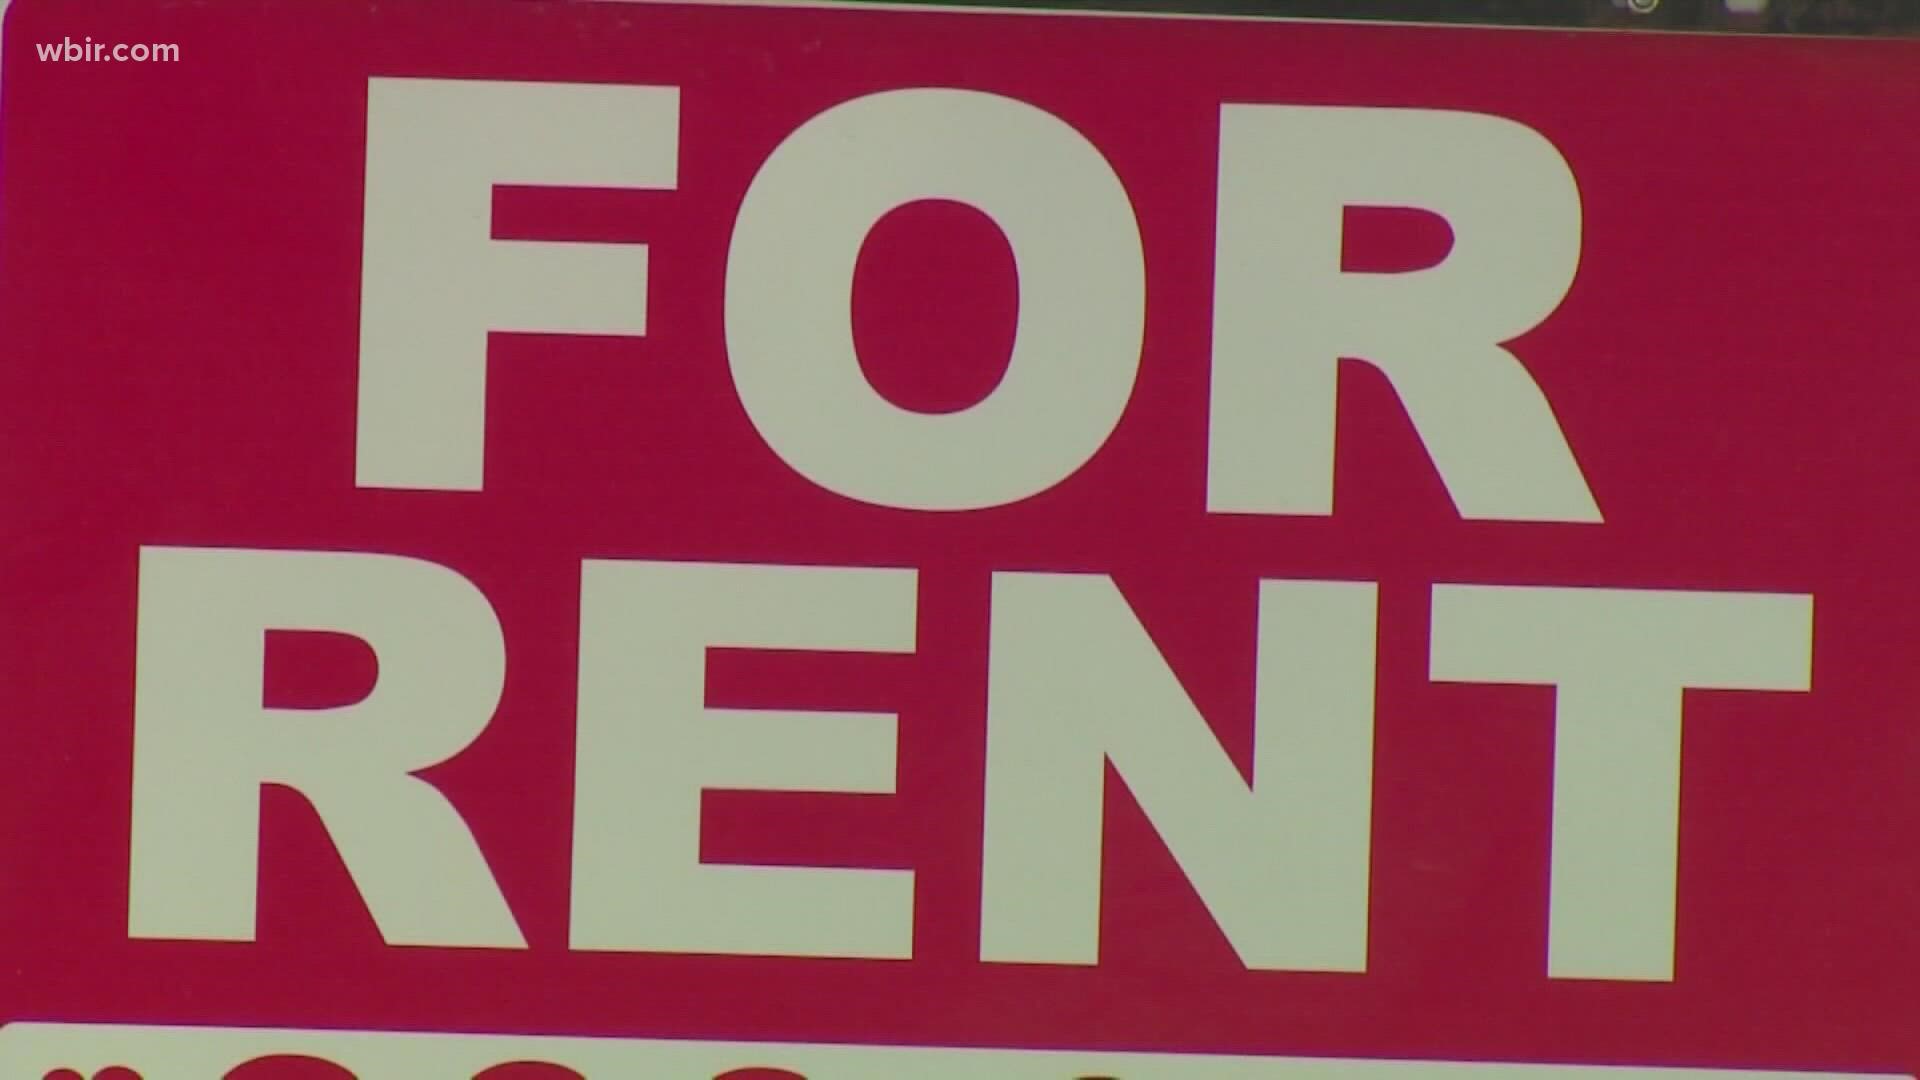 Rent prices have soared around 20 - 30 percent in the last year across Tennessee.